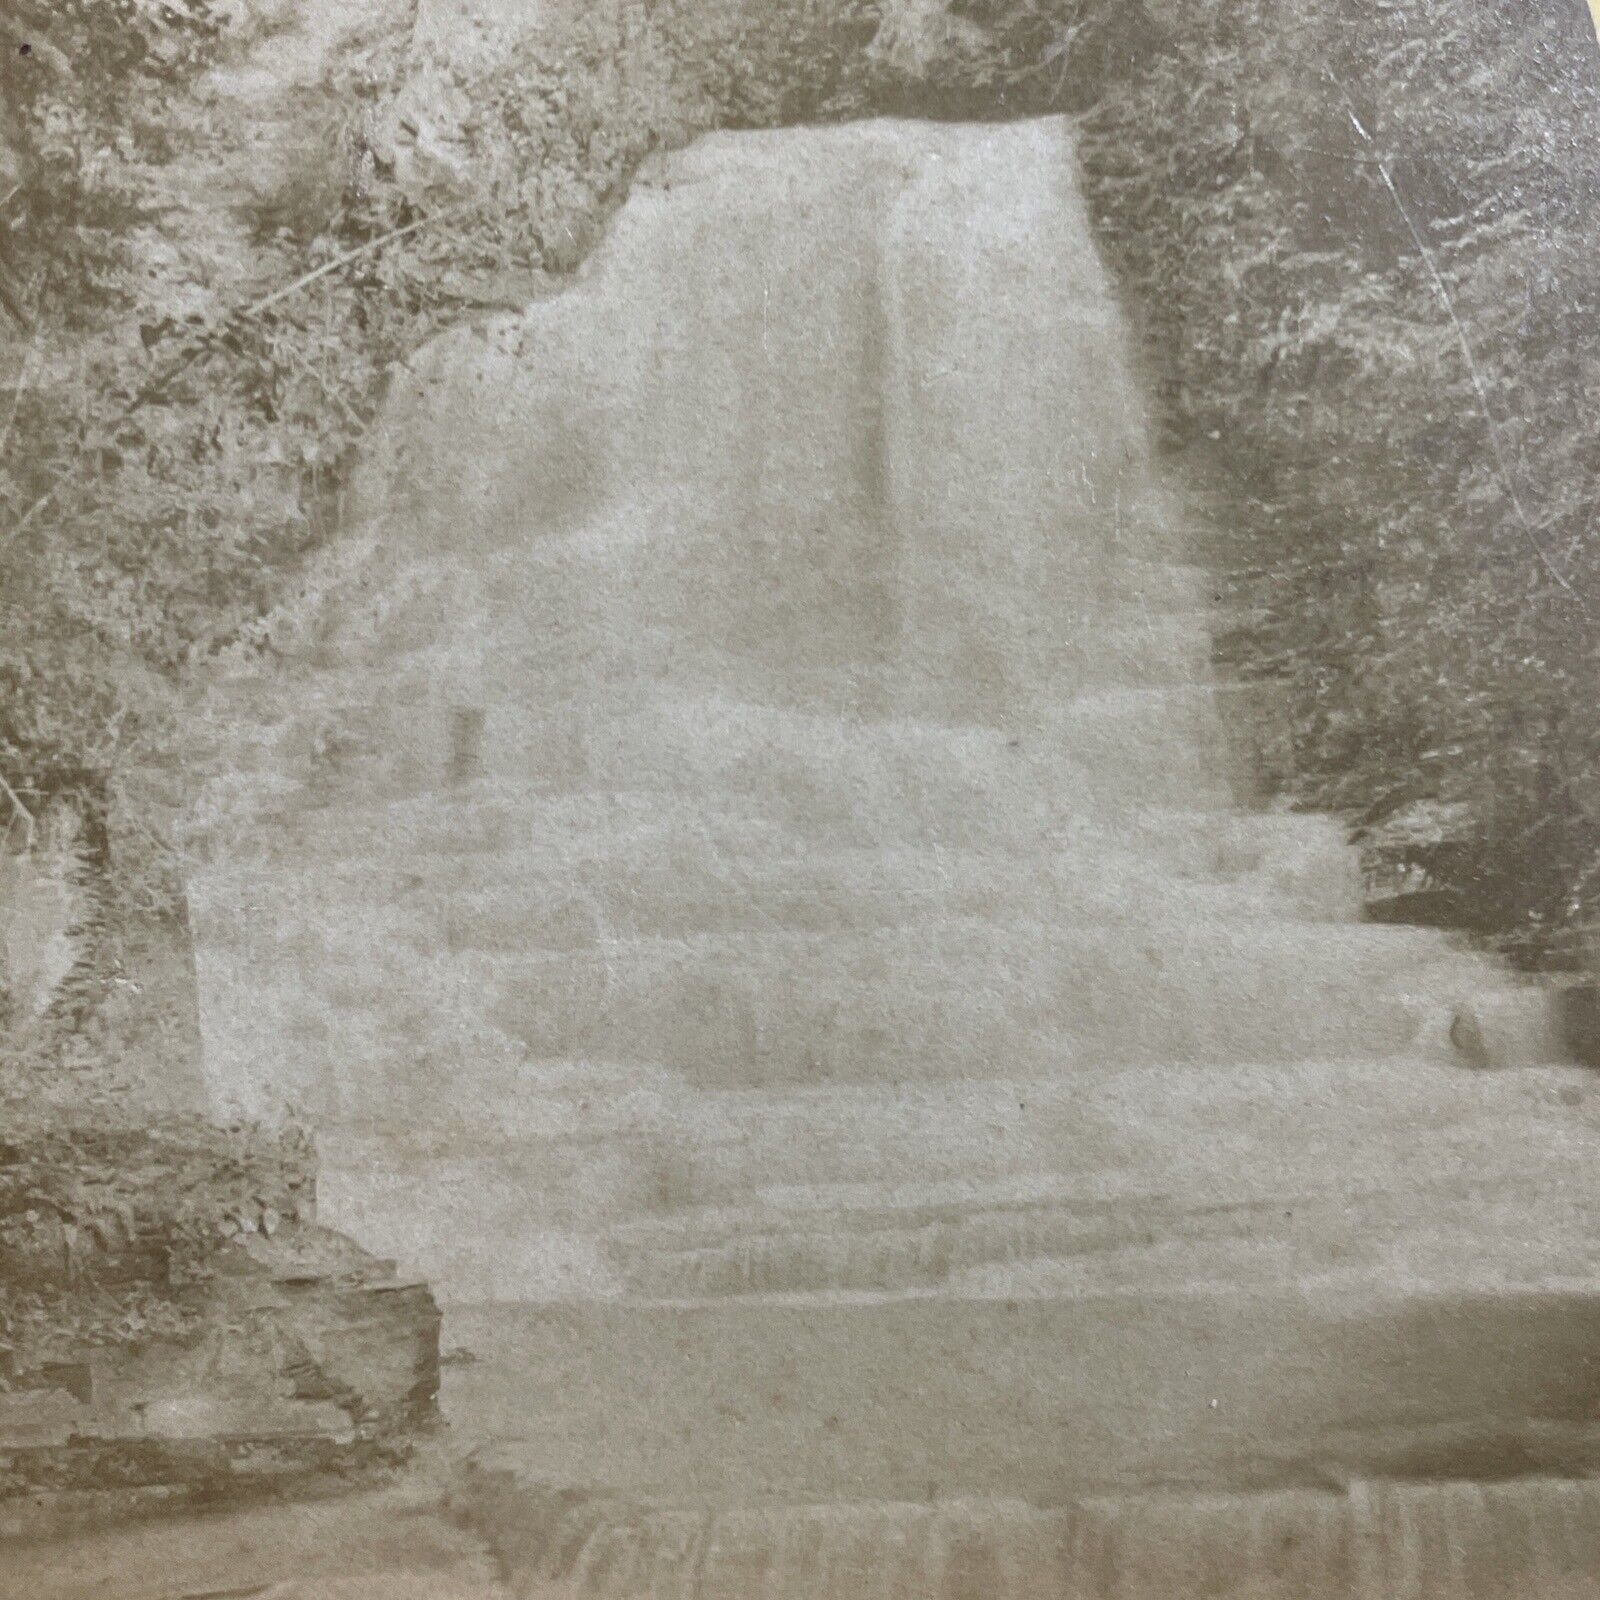 Antique 1870s Indian Chimney Falls Lansing NY Stereoview Photo Card P1980-12